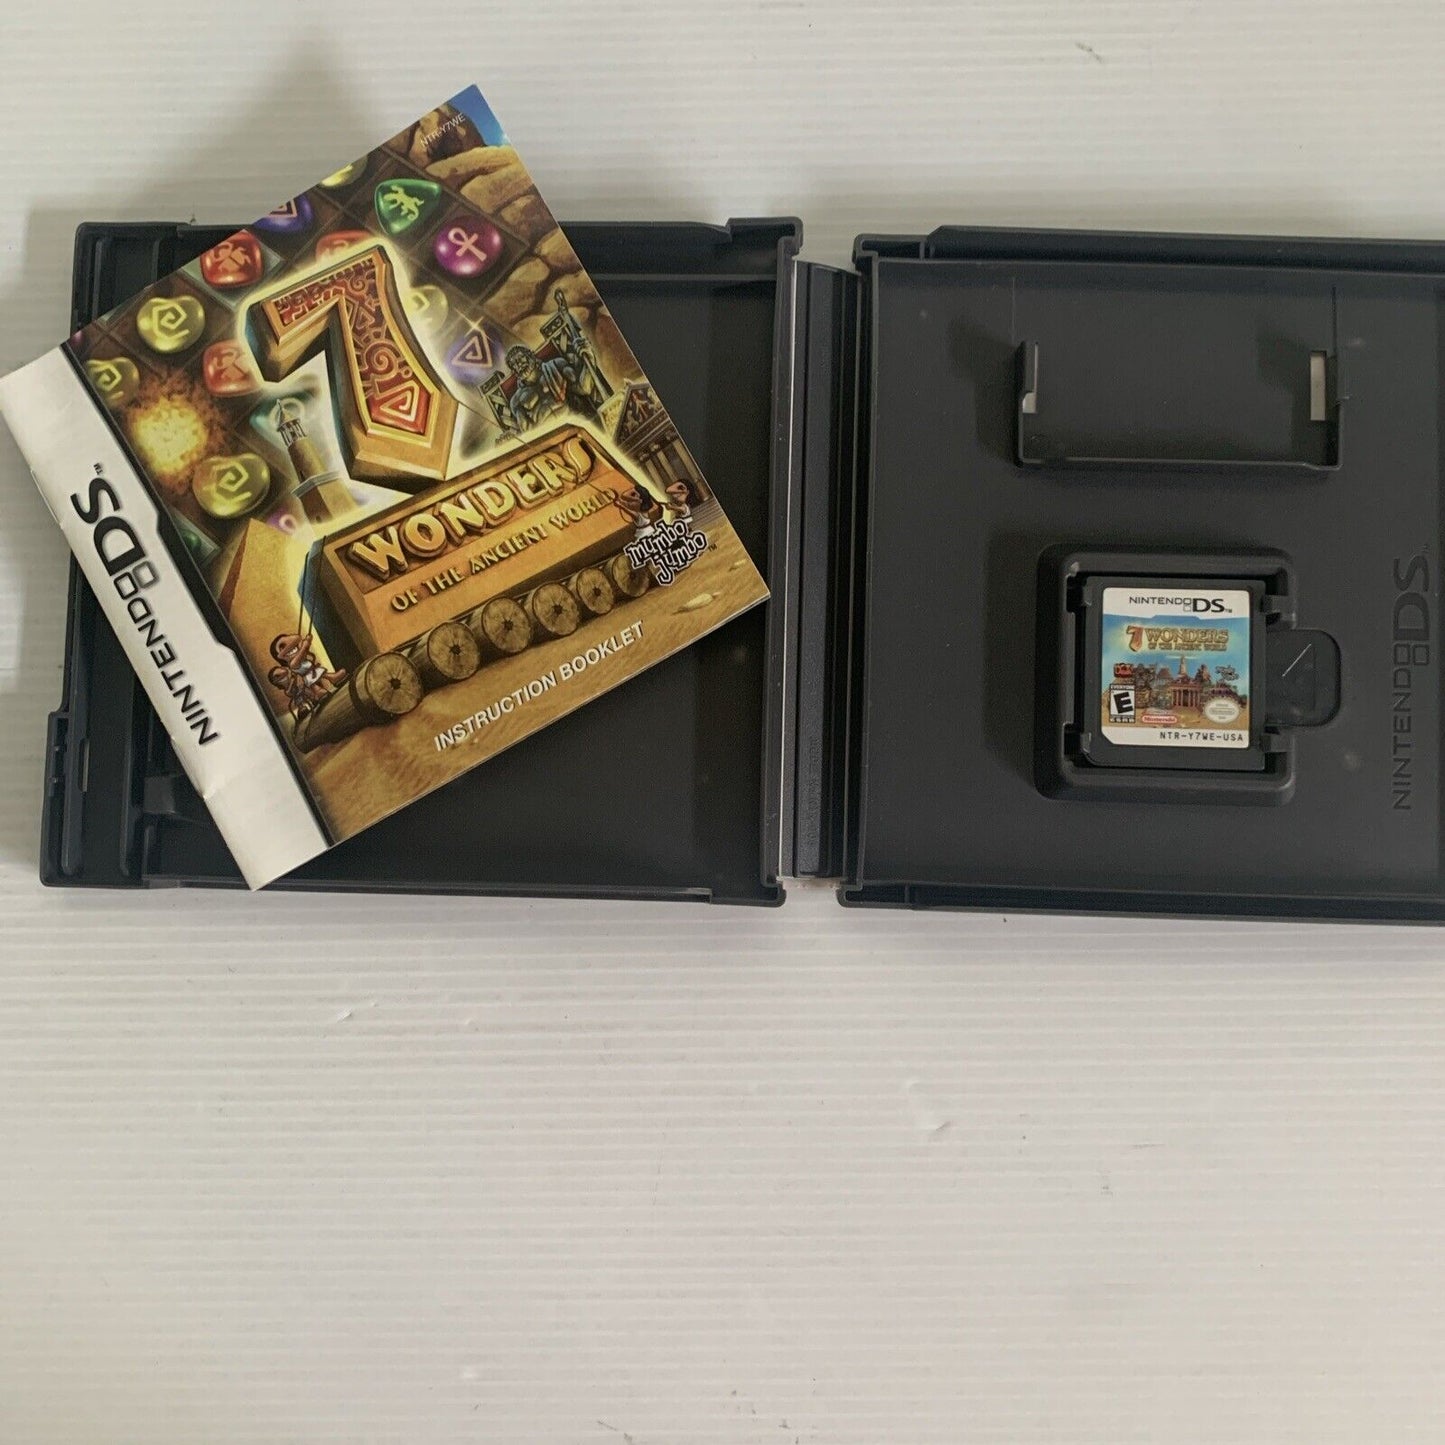 7 Wonders Of The Ancient World Nintendo DS Game